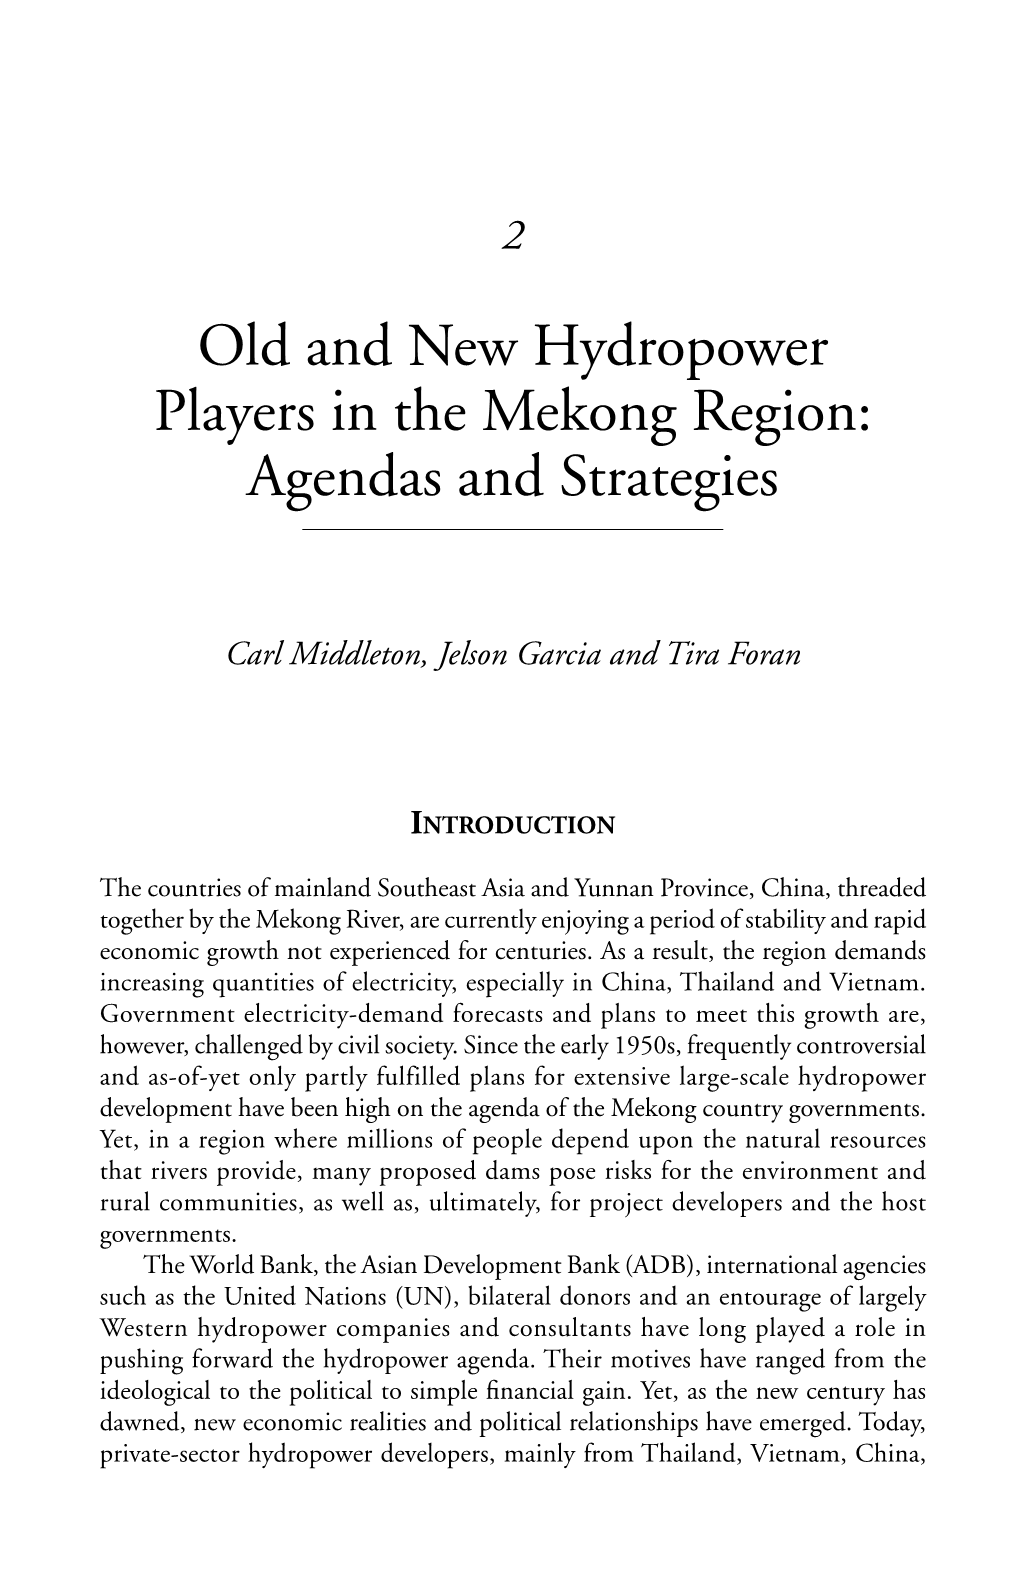 Old and New Hydropower Players in the Mekong Region: Agendas and Strategies